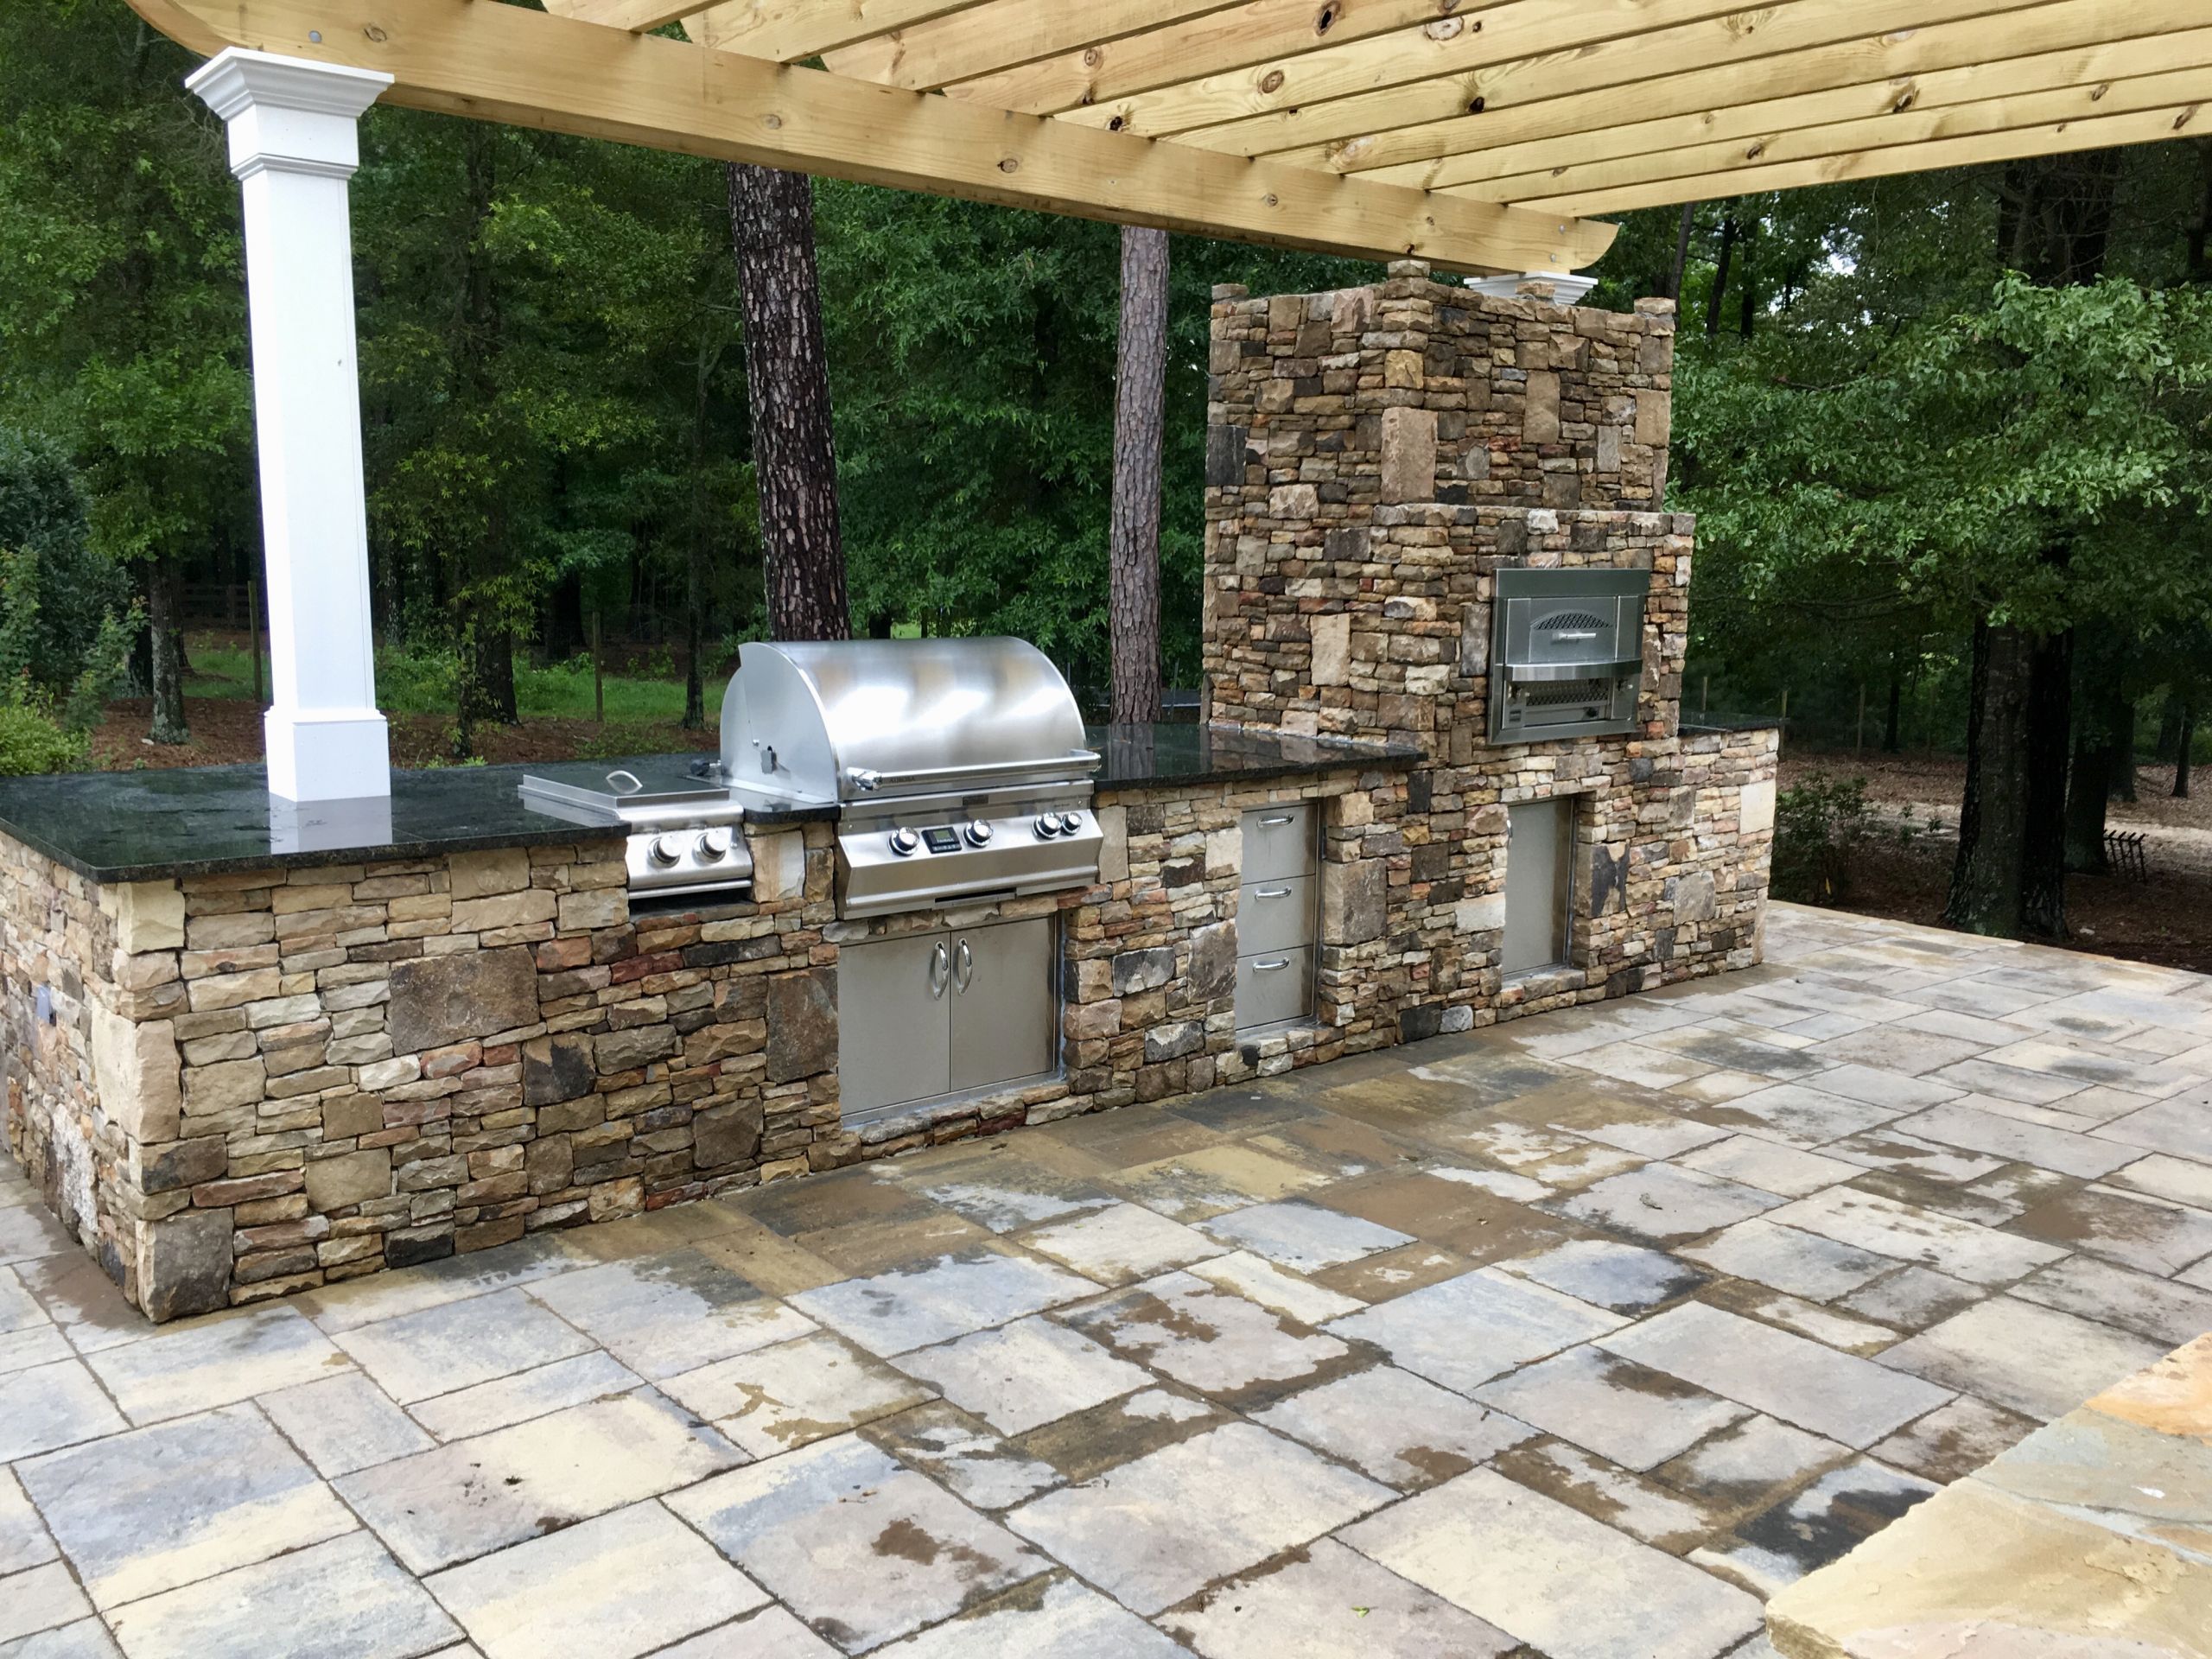 Outdoor Kitchen Oven
 Outdoor Kitchen Built in Gas Pizza Oven Fireside